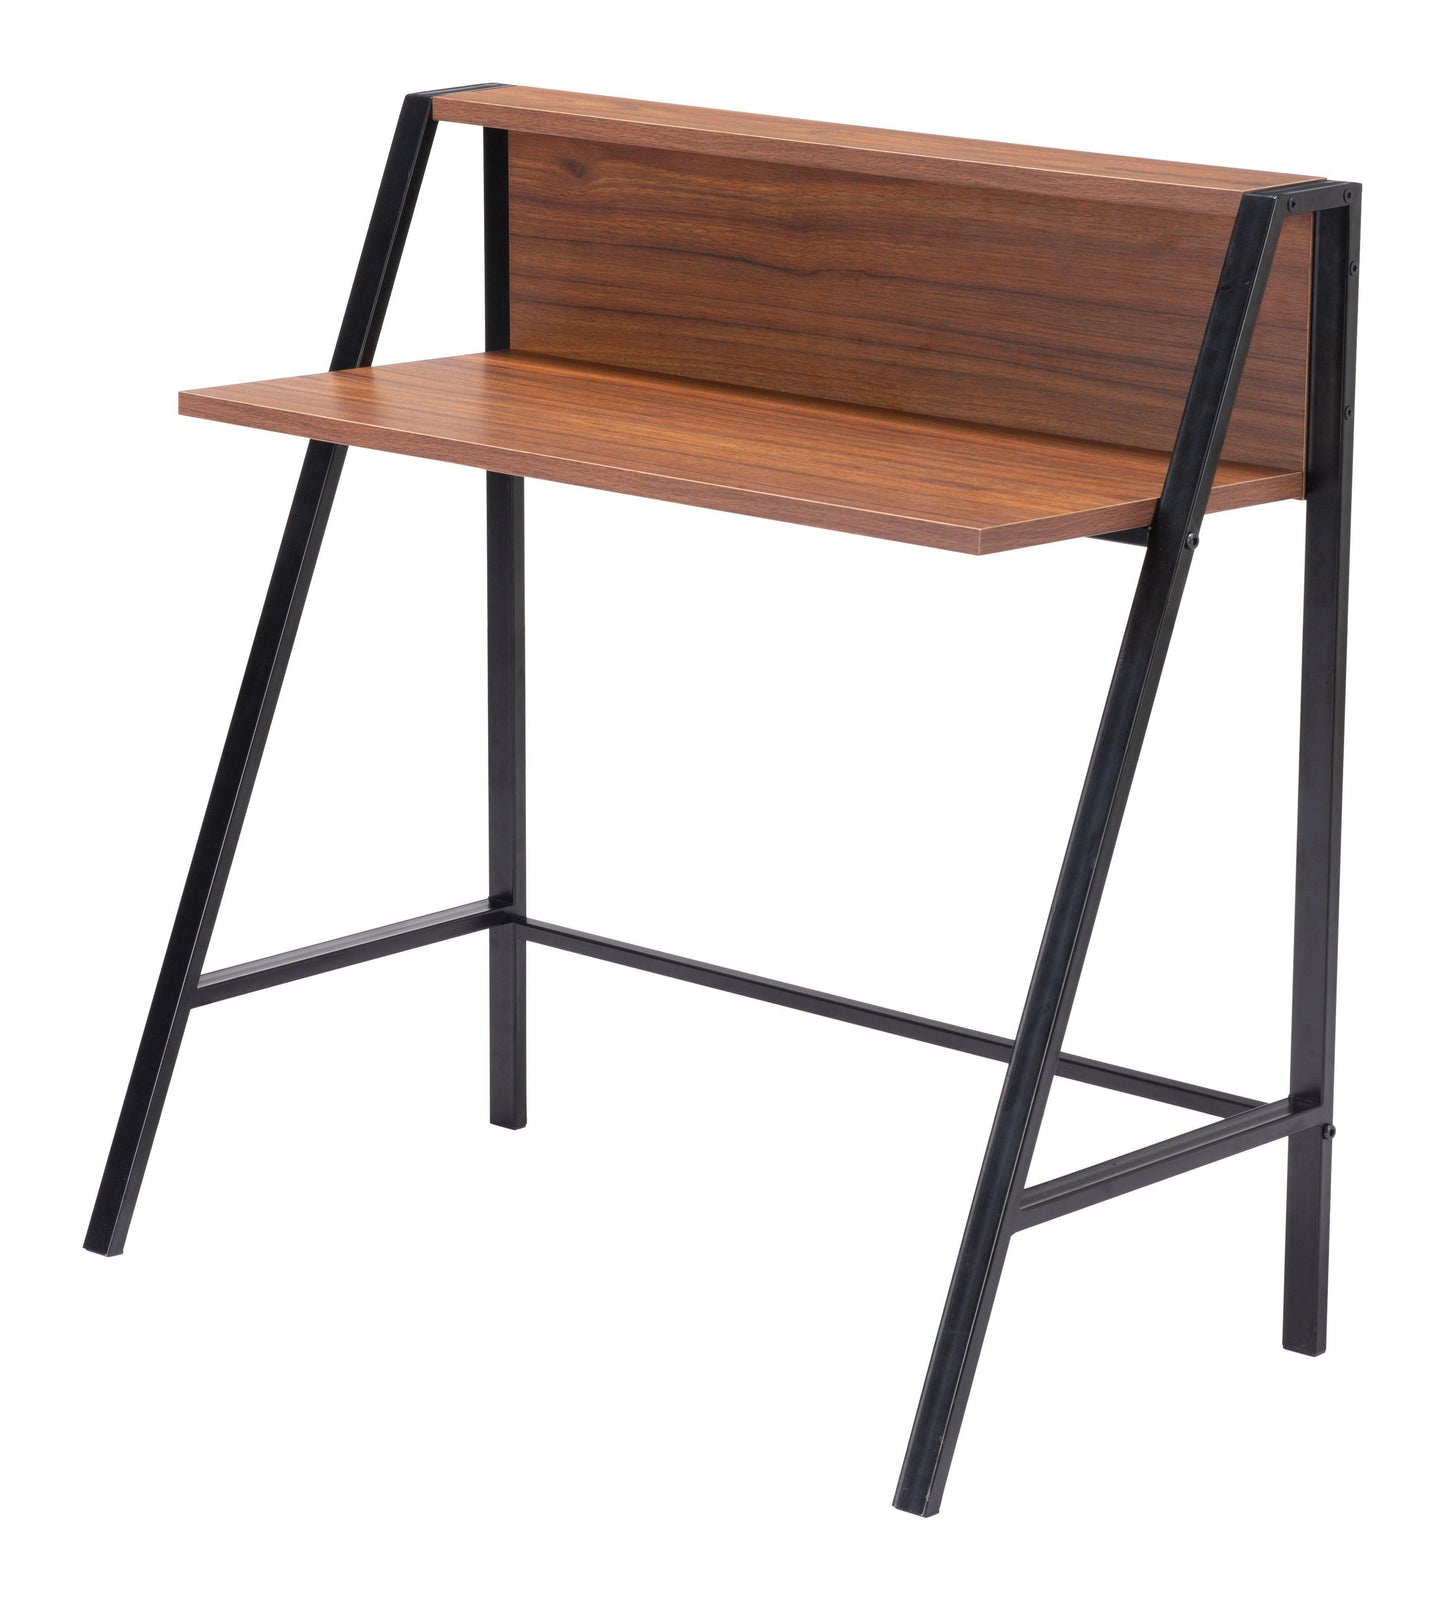 Poland Desk Walnut & Black - Sideboards and Things Brand_Zuo Modern, Color_Black, Color_Brown, Depth_10-20, Finish_Powder Coated, Height_30-40, Materials_Metal, Materials_Wood, Metal Type_Steel, Product Type_Standard Desk, Width_30-40, Wood Species_MDF